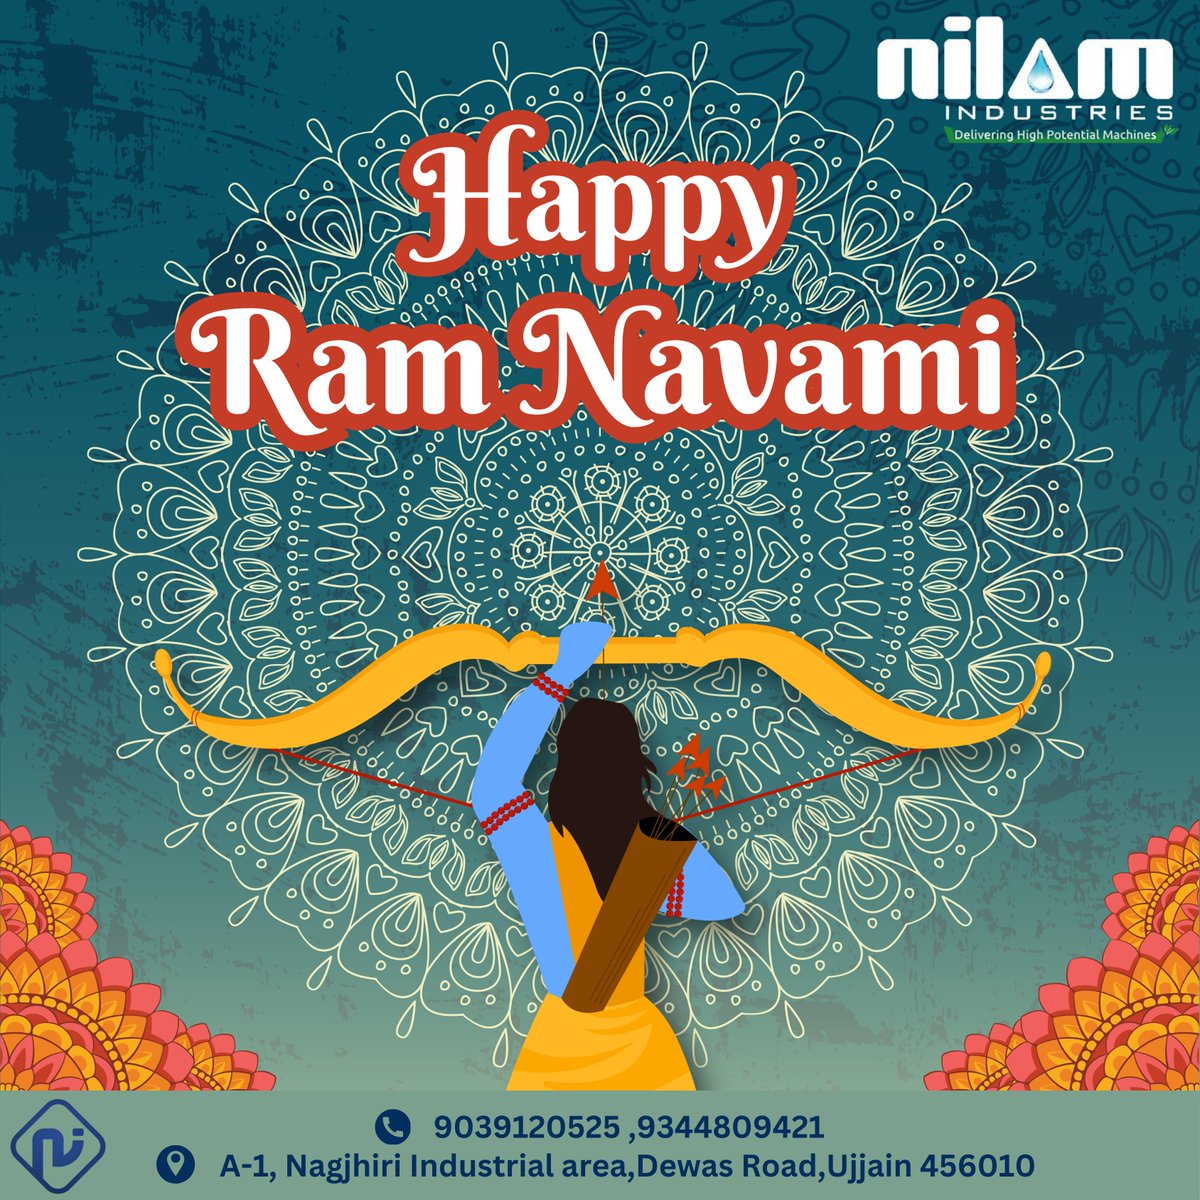 May the blessings of Lord Rama fill your life with happiness, peace, and prosperity. Happy Ram Navami!' 🙏🌼
#NilamIndustries #CoolingInnovation
#EngineeringExcellence
#Metalworking #InnovationInMotion
#NilamIndustriesTechInnovation
#SustainabilityNow
#WellnessWednesday
#Digital